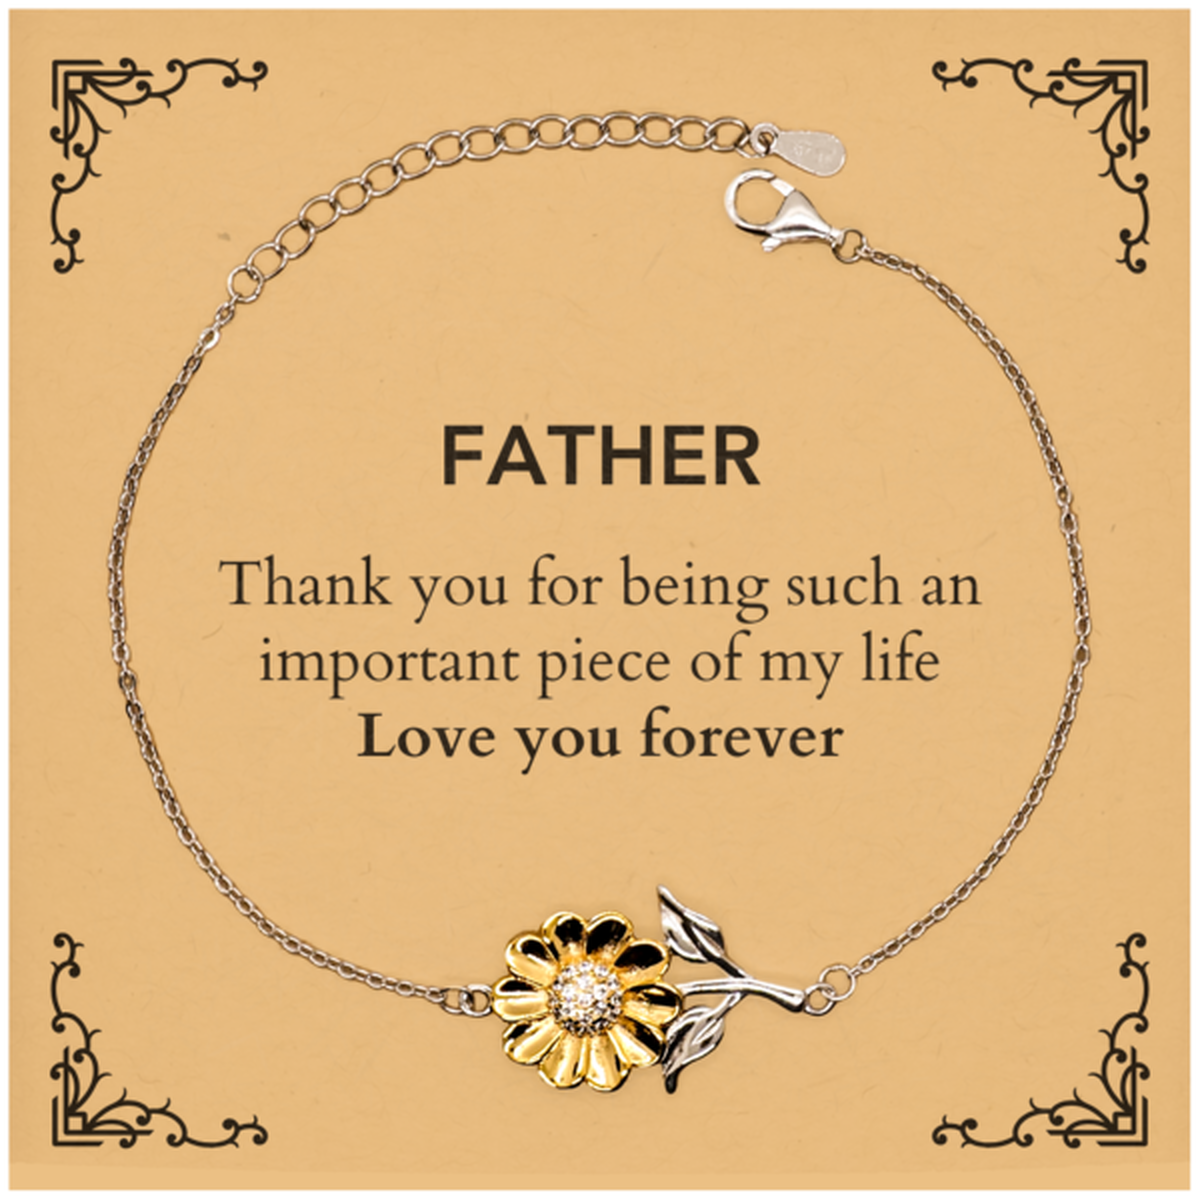 Appropriate Father Sunflower Bracelet Epic Birthday Gifts for Father Thank you for being such an important piece of my life Father Christmas Mothers Fathers Day